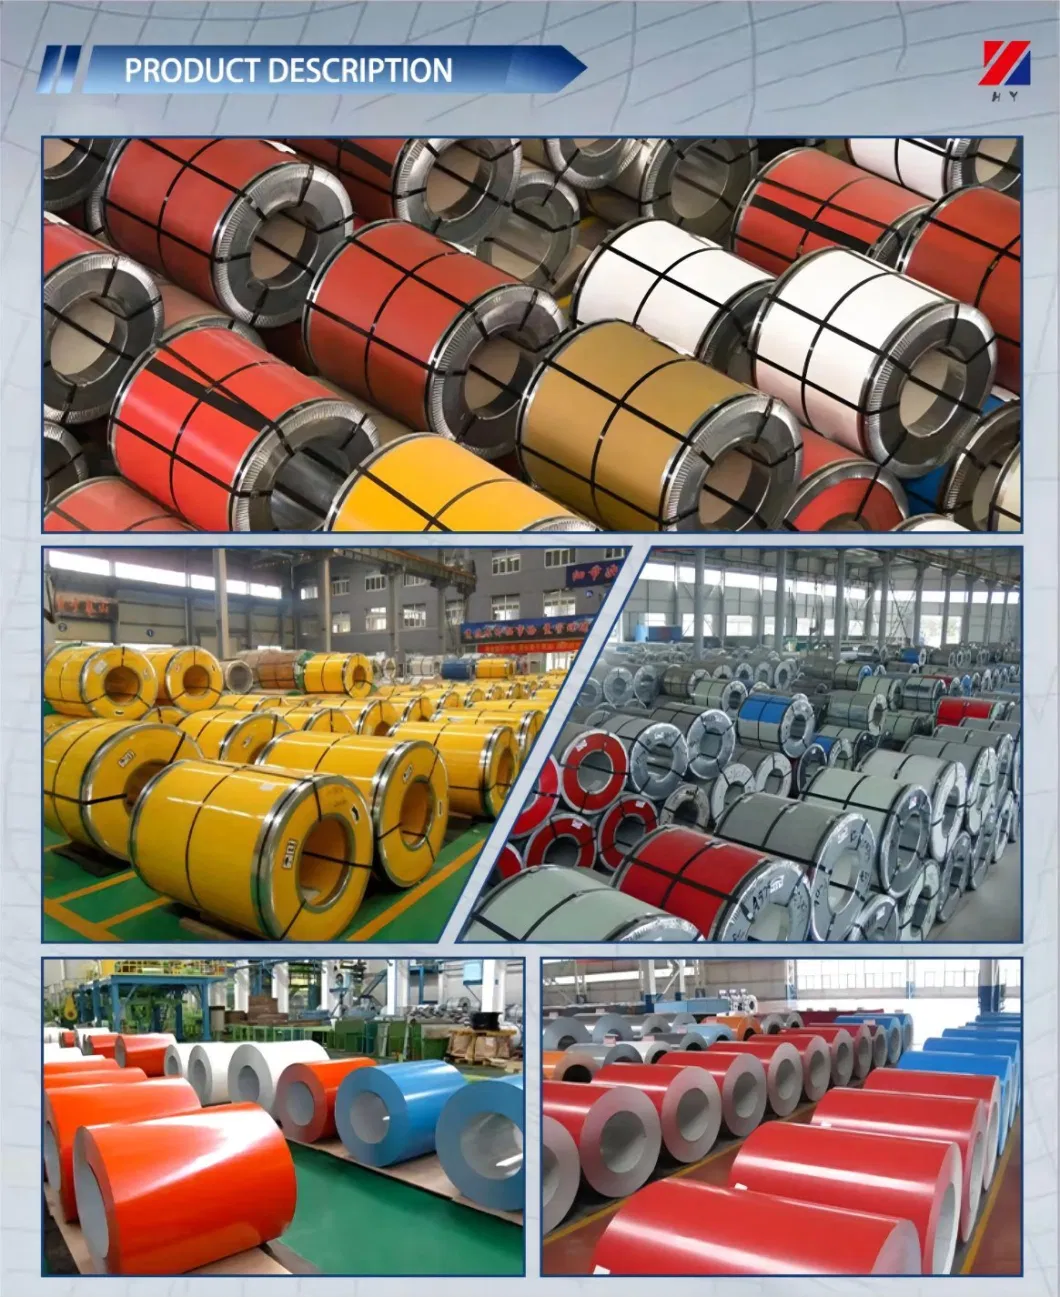 Gi/PPGI/PPGL Ral Wooden Pattern Zinc/Al-Zn/Color Coated Coating Colored Galvanized Galvalume Steel Coil/Sheet/Strip/Roll/Plate Round/Square Pipes/Tubes